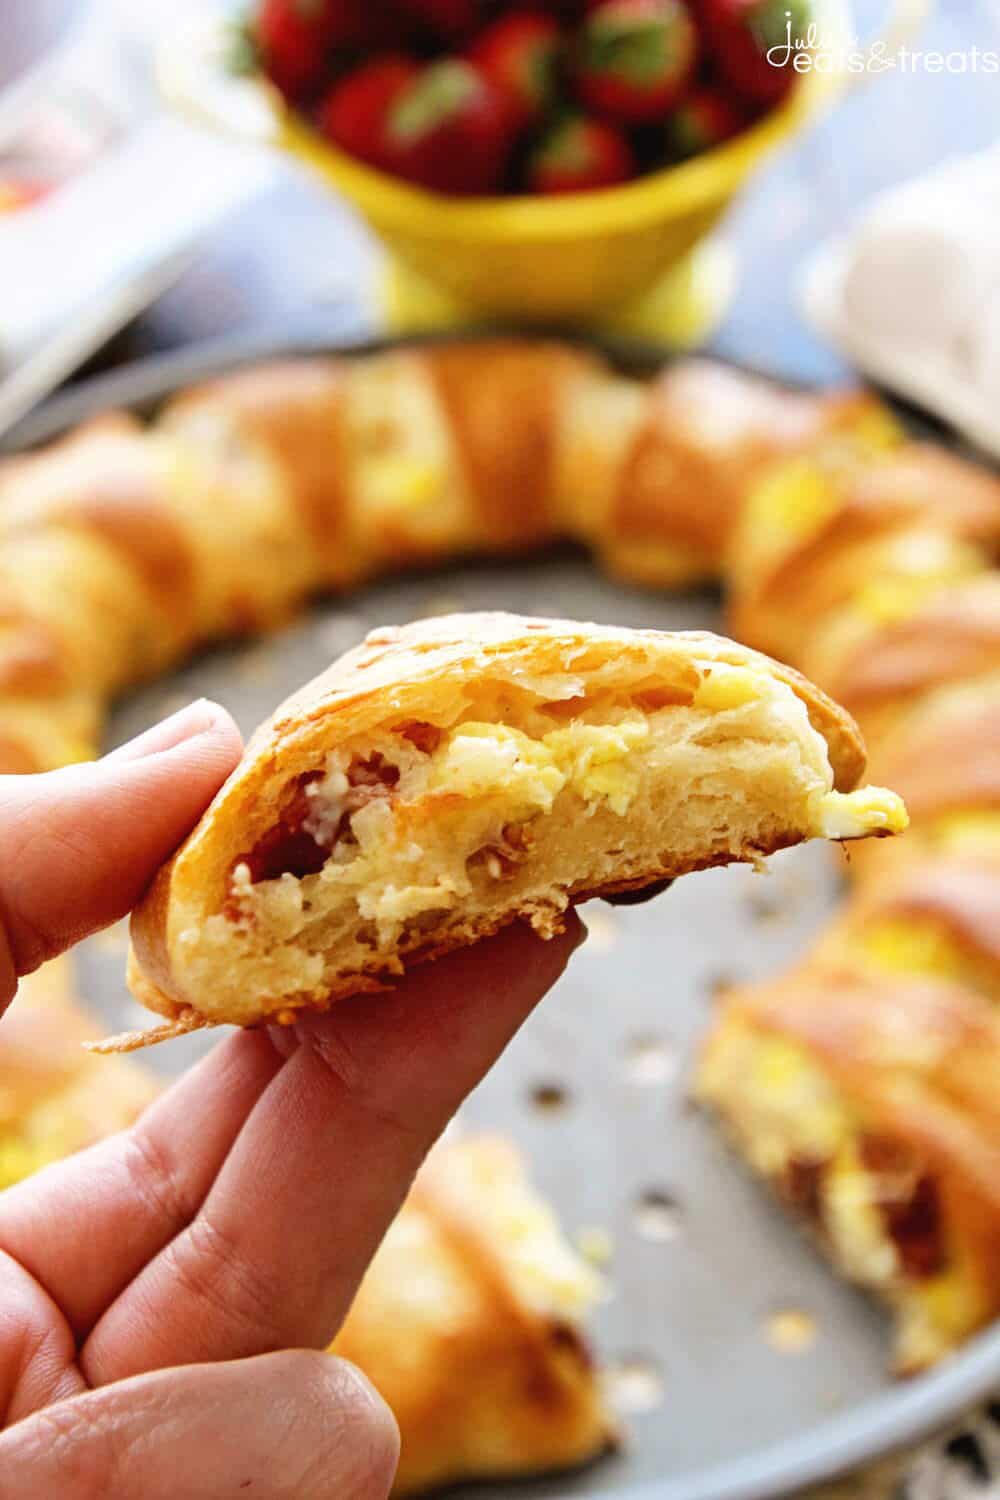 Cheesy Bacon & Egg Crescent Ring ~ Flaky Crescent Rolls Stuffed with Scrambled Eggs, Cheese, and Bacon for a Delicious Breakfast Recipe!